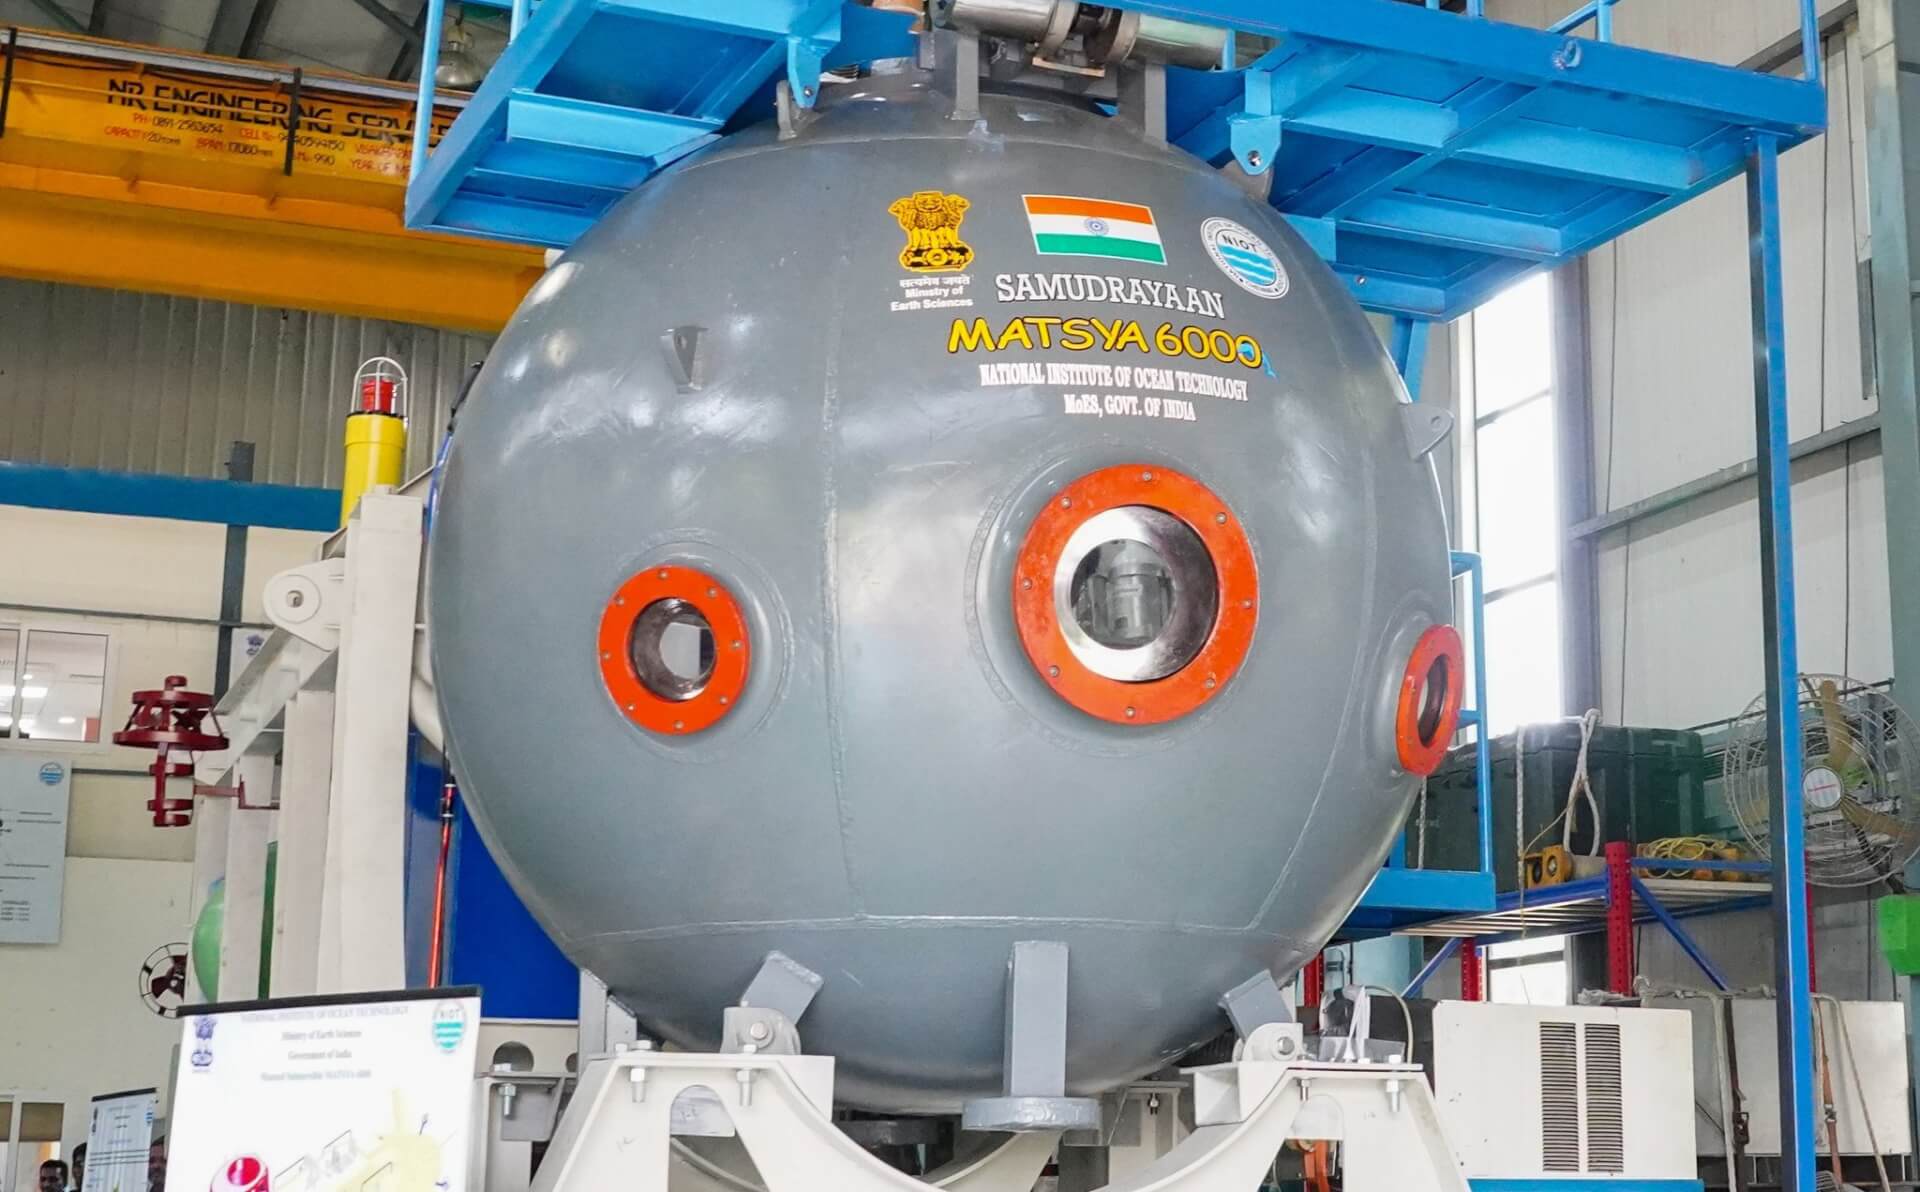 Samudrayaan Mission: India to Send ‘Titan’-Like Submersible Under Water!